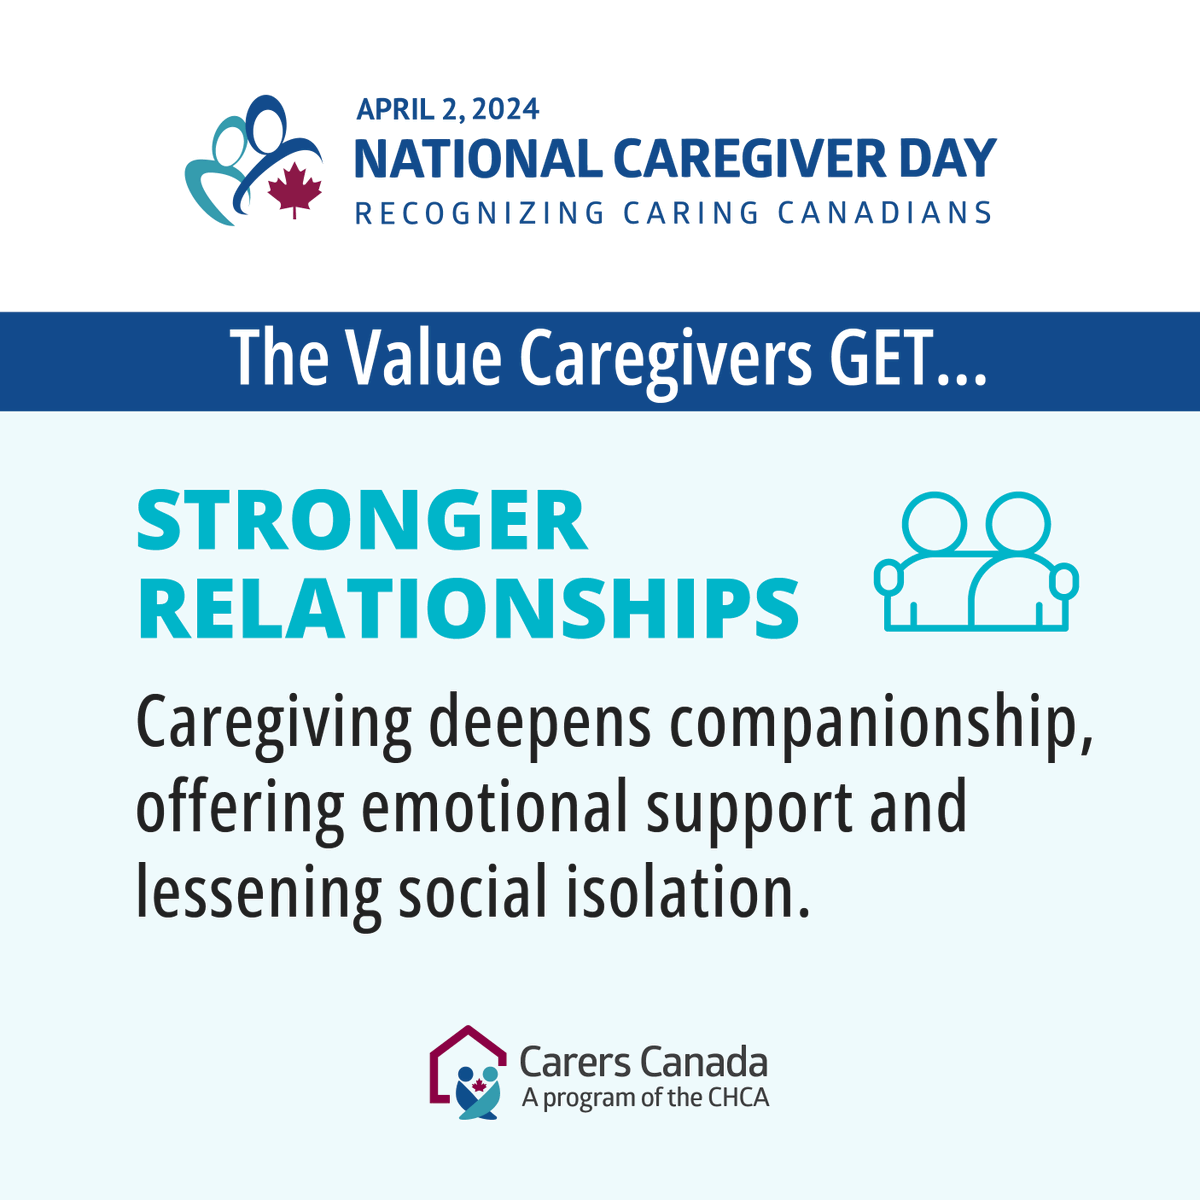 Caregivers often experience personal growth and a heightened sense of purpose. On April 2 #NationalCaregiverDay, we honor their self-fulfillment and dedication. carerscanada.ca/national-careg…